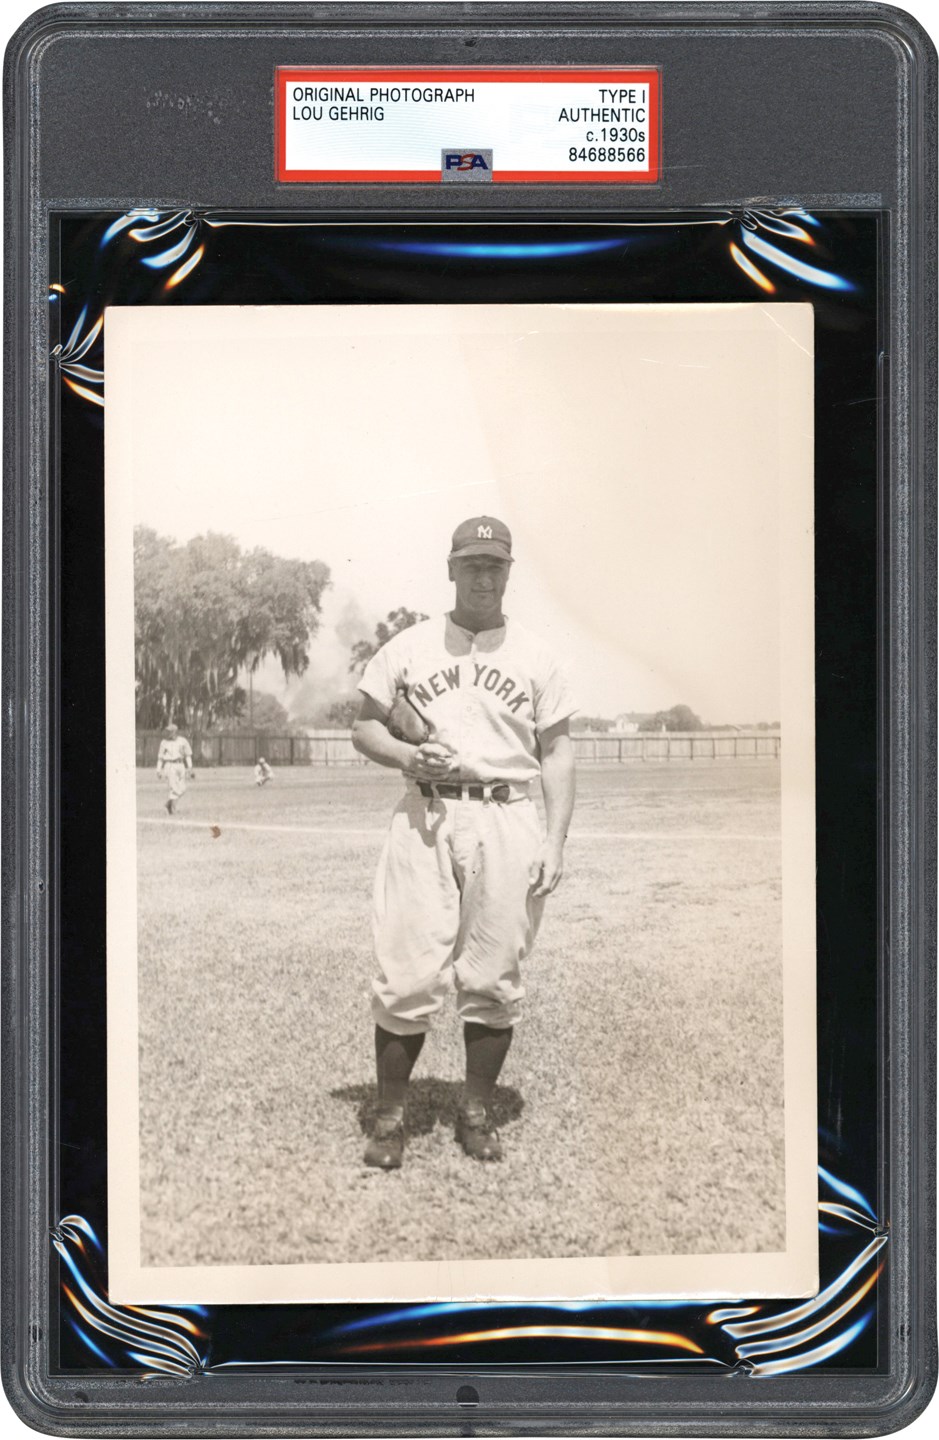 - 1939 Lou Gehrig New York Yankees Original Photograph - One Month Before ALS Diagnosis (PSA Type I)